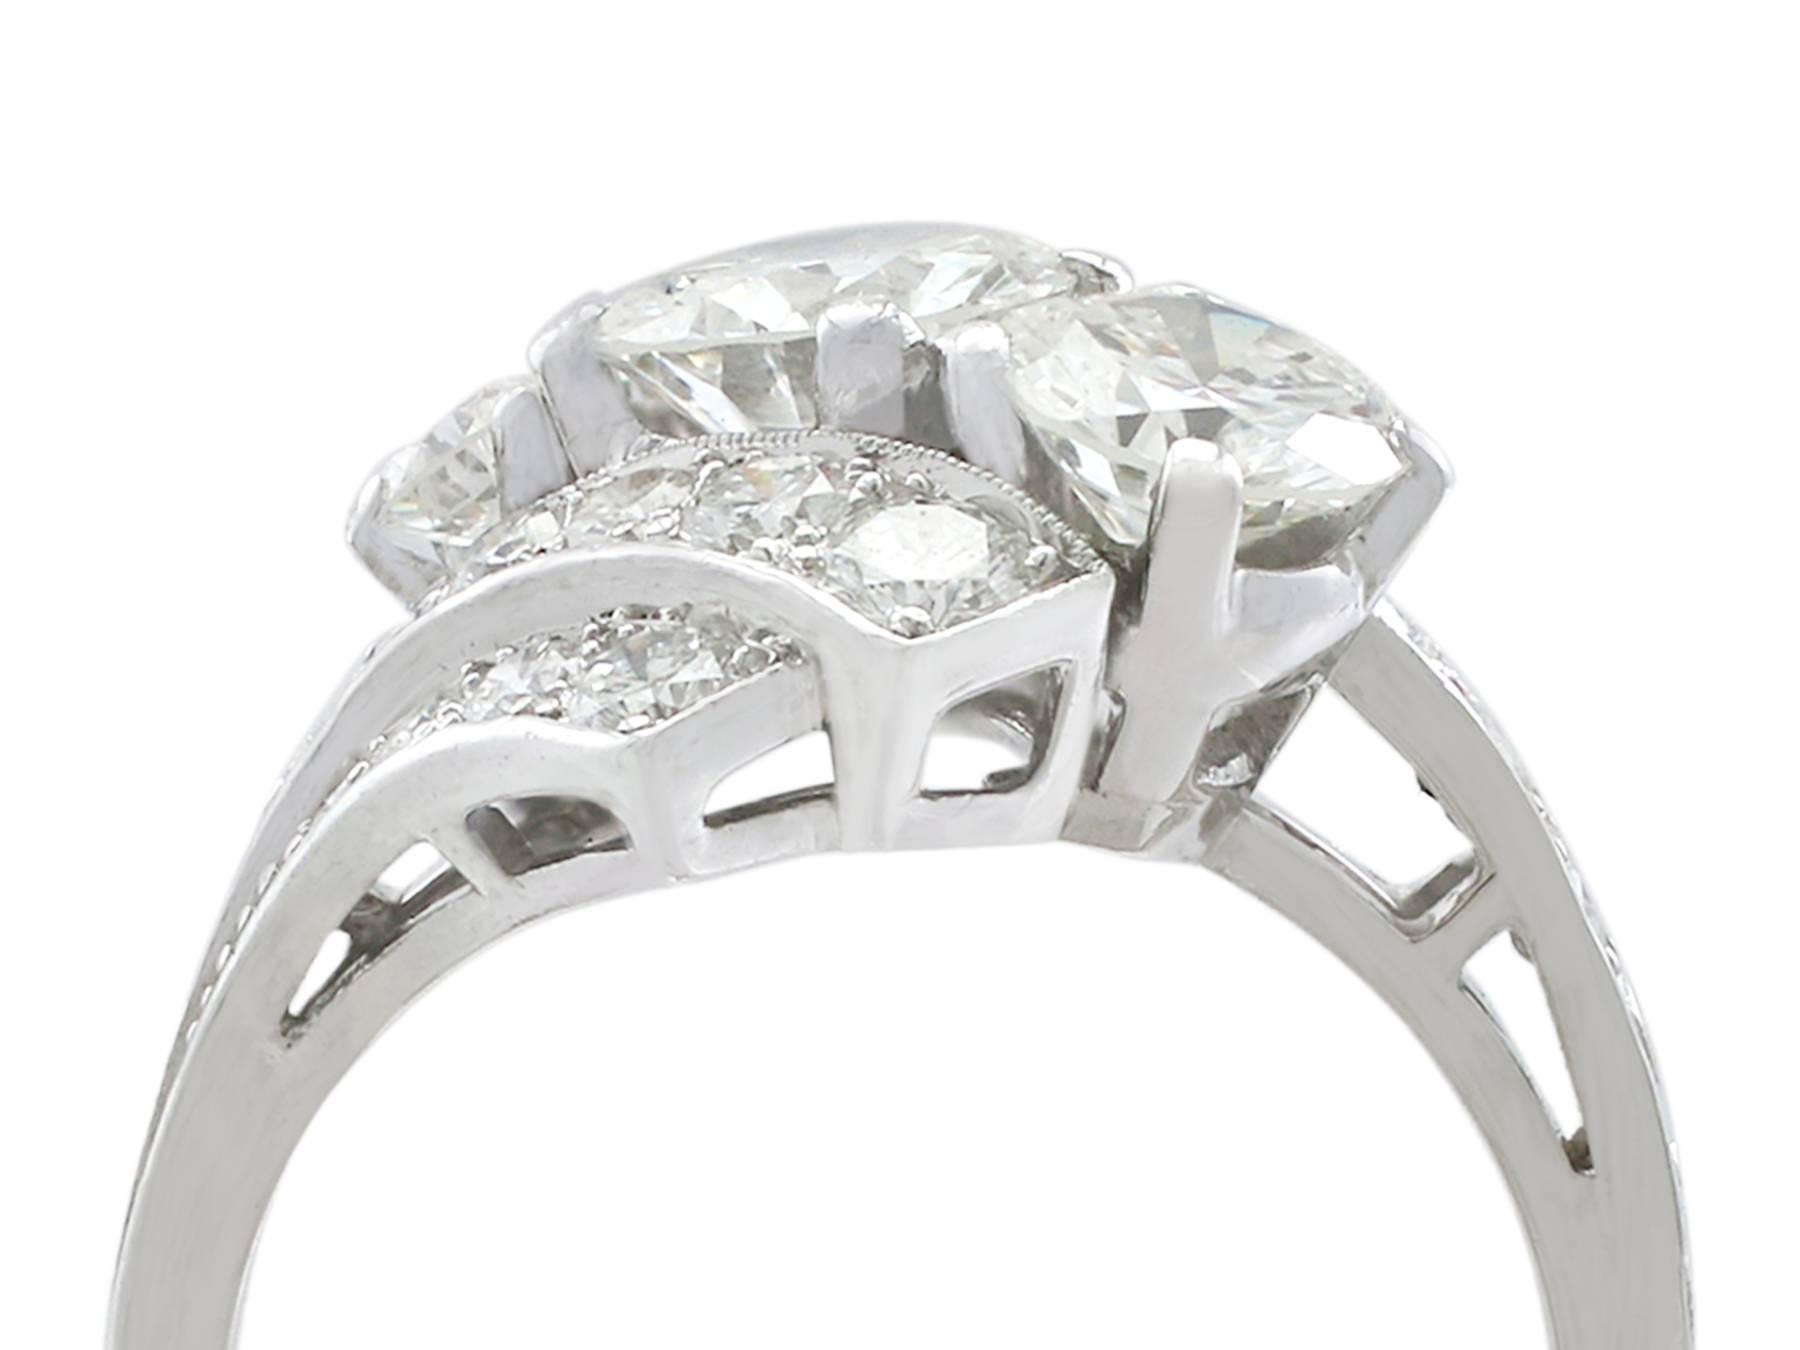 A stunning, fine and impressive vintage 2.67 carat multi-diamond cluster ring in platinum; part of our vintage jewellery and estate jewelry collections

This stunning, fine and impressive multi-diamond ring has been crafted in platinum.

The